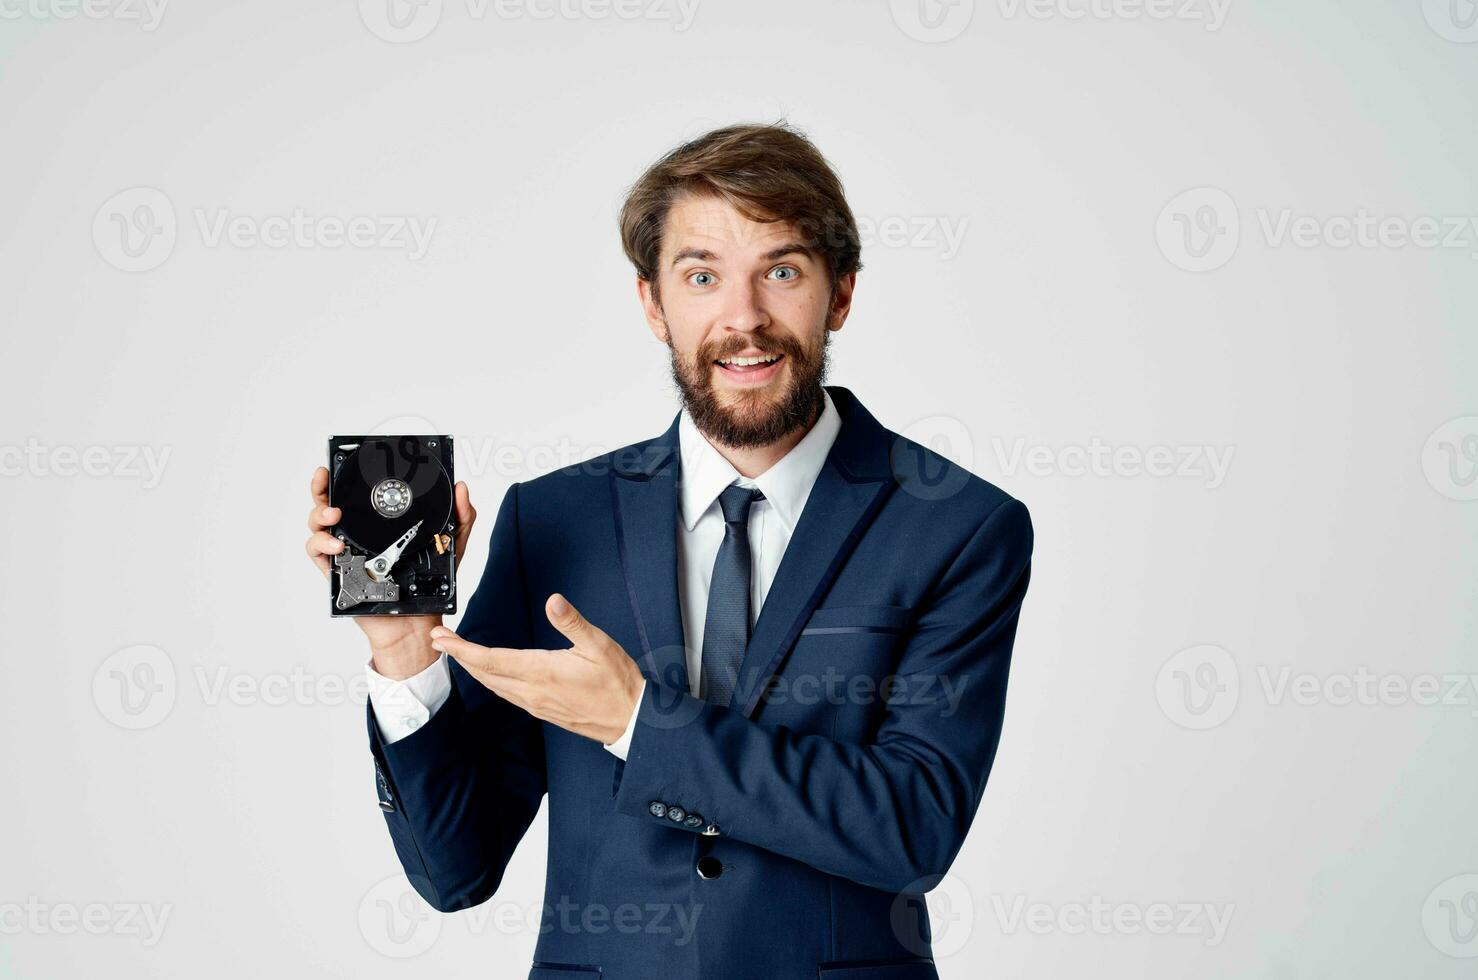 business man in suit hard drive technology information photo